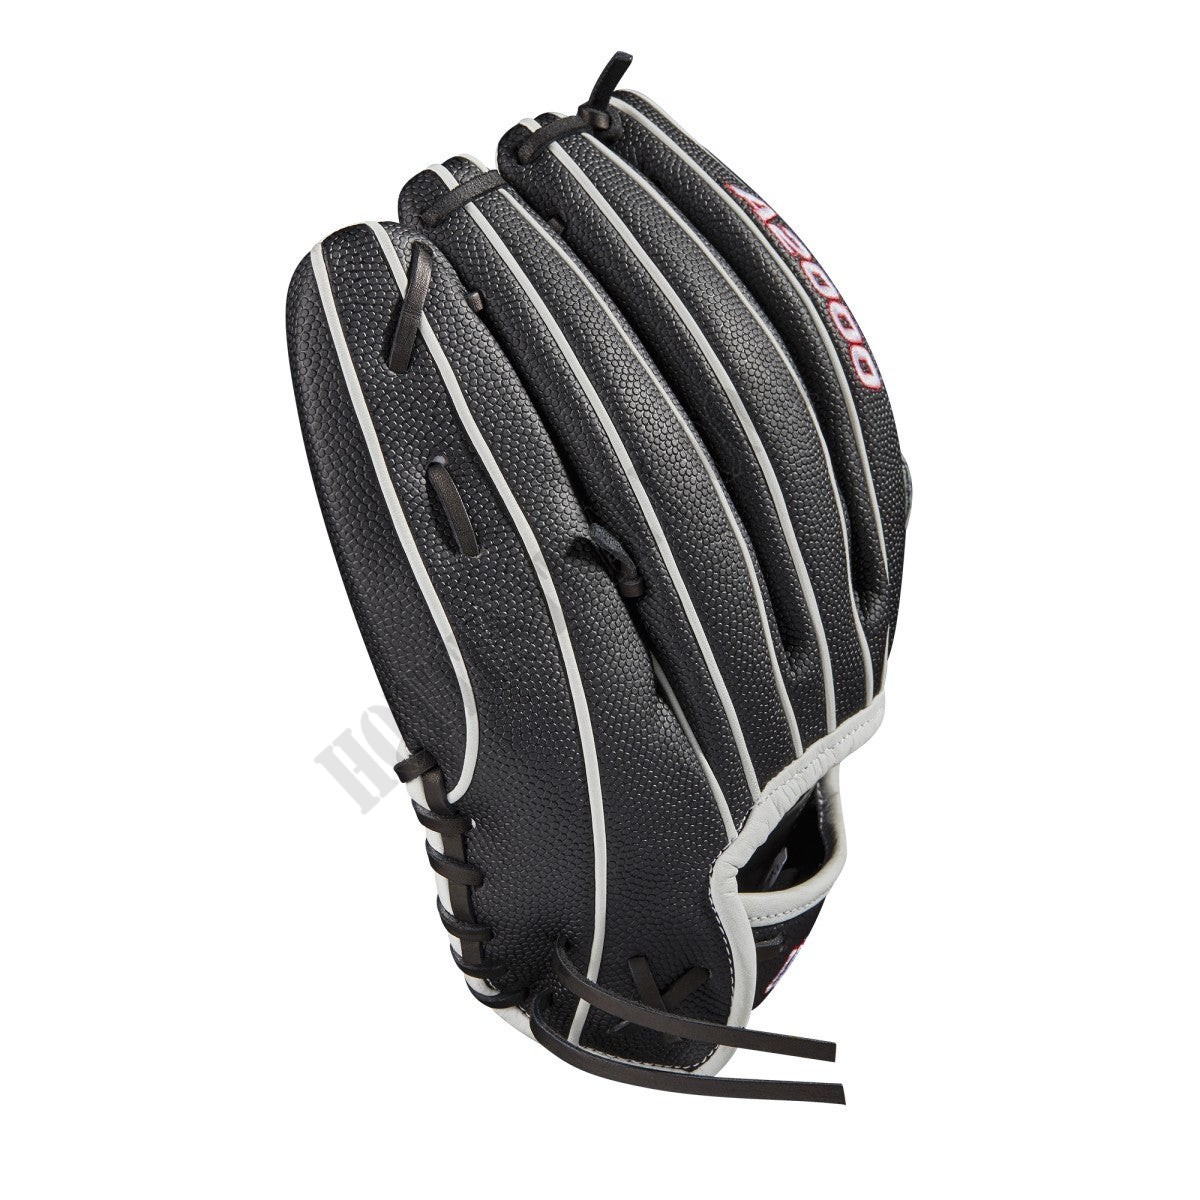 2021 A2000 P12SS 12" Pitcher's Faspitch Glove ● Wilson Promotions - -4